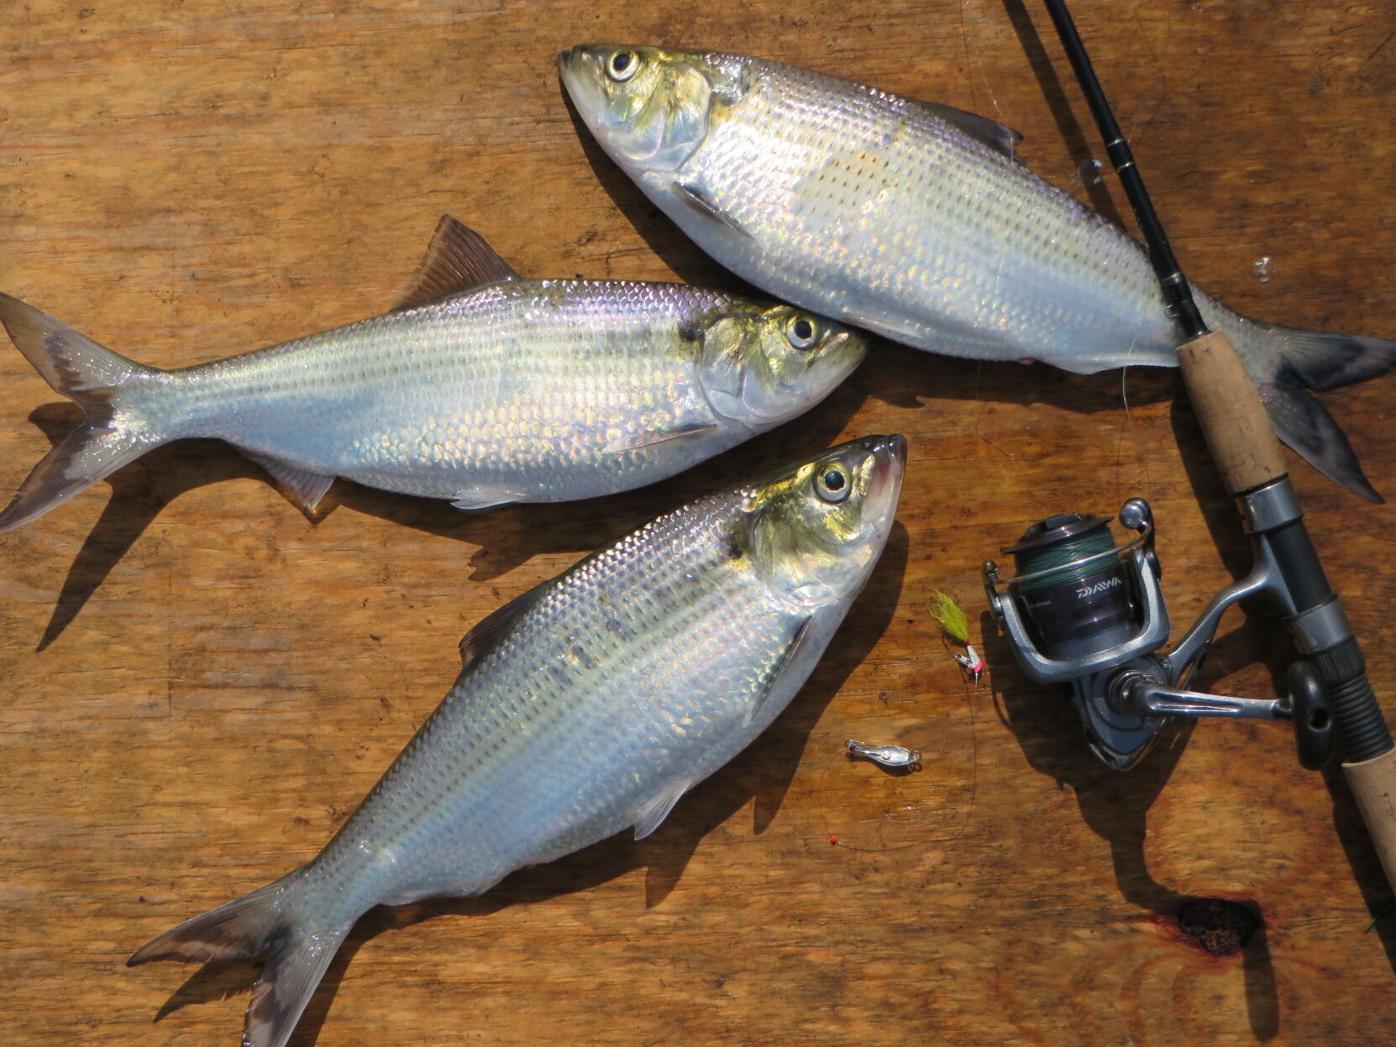 Sun Journal Outdoor Column: Shad Say Spring is Coming